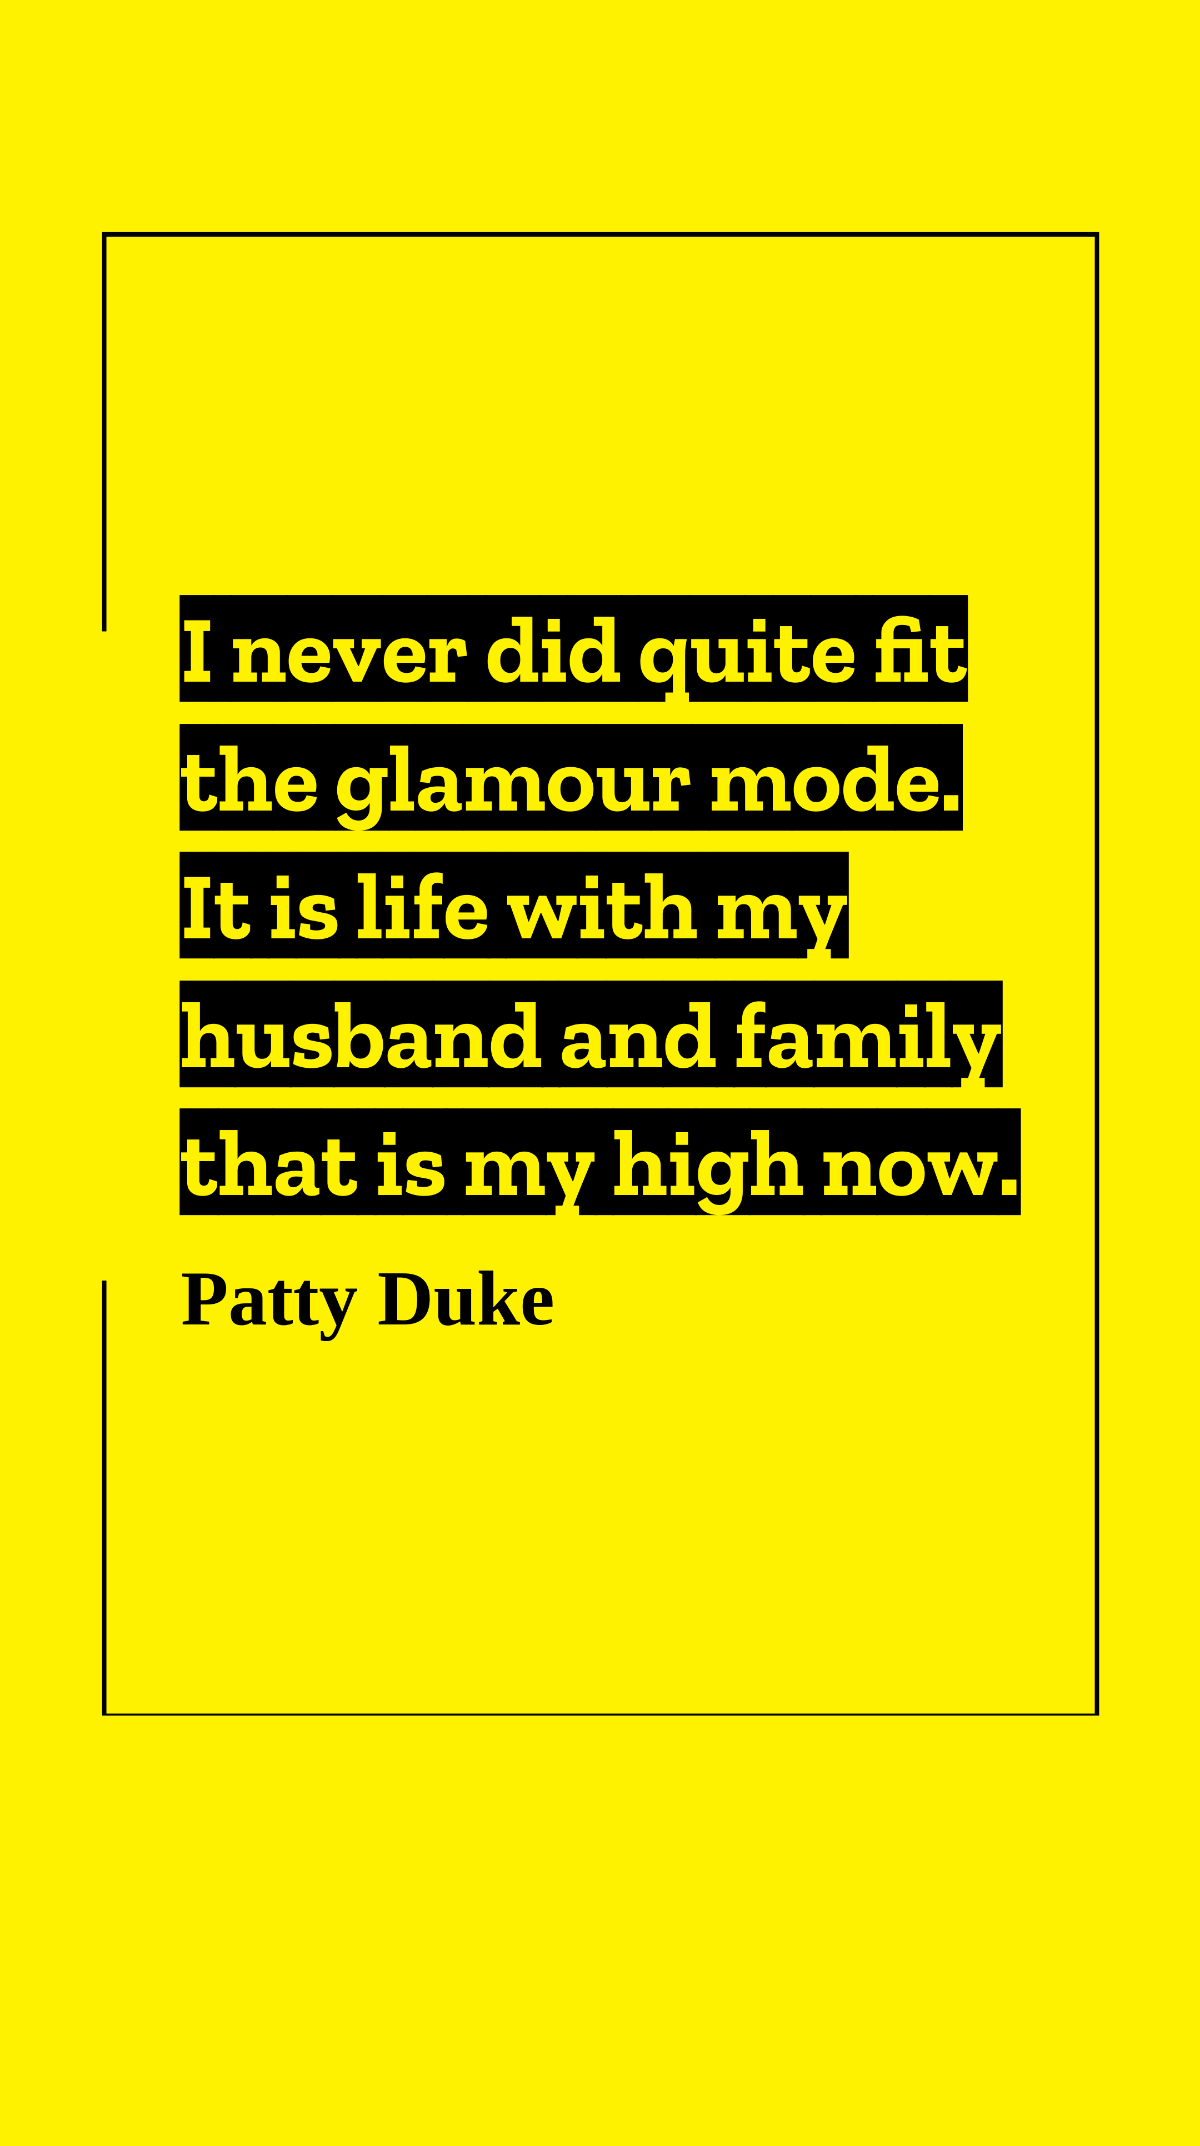 Patty Duke - I never did quite fit the glamour mode. It is life with my husband and family that is my high now. Template